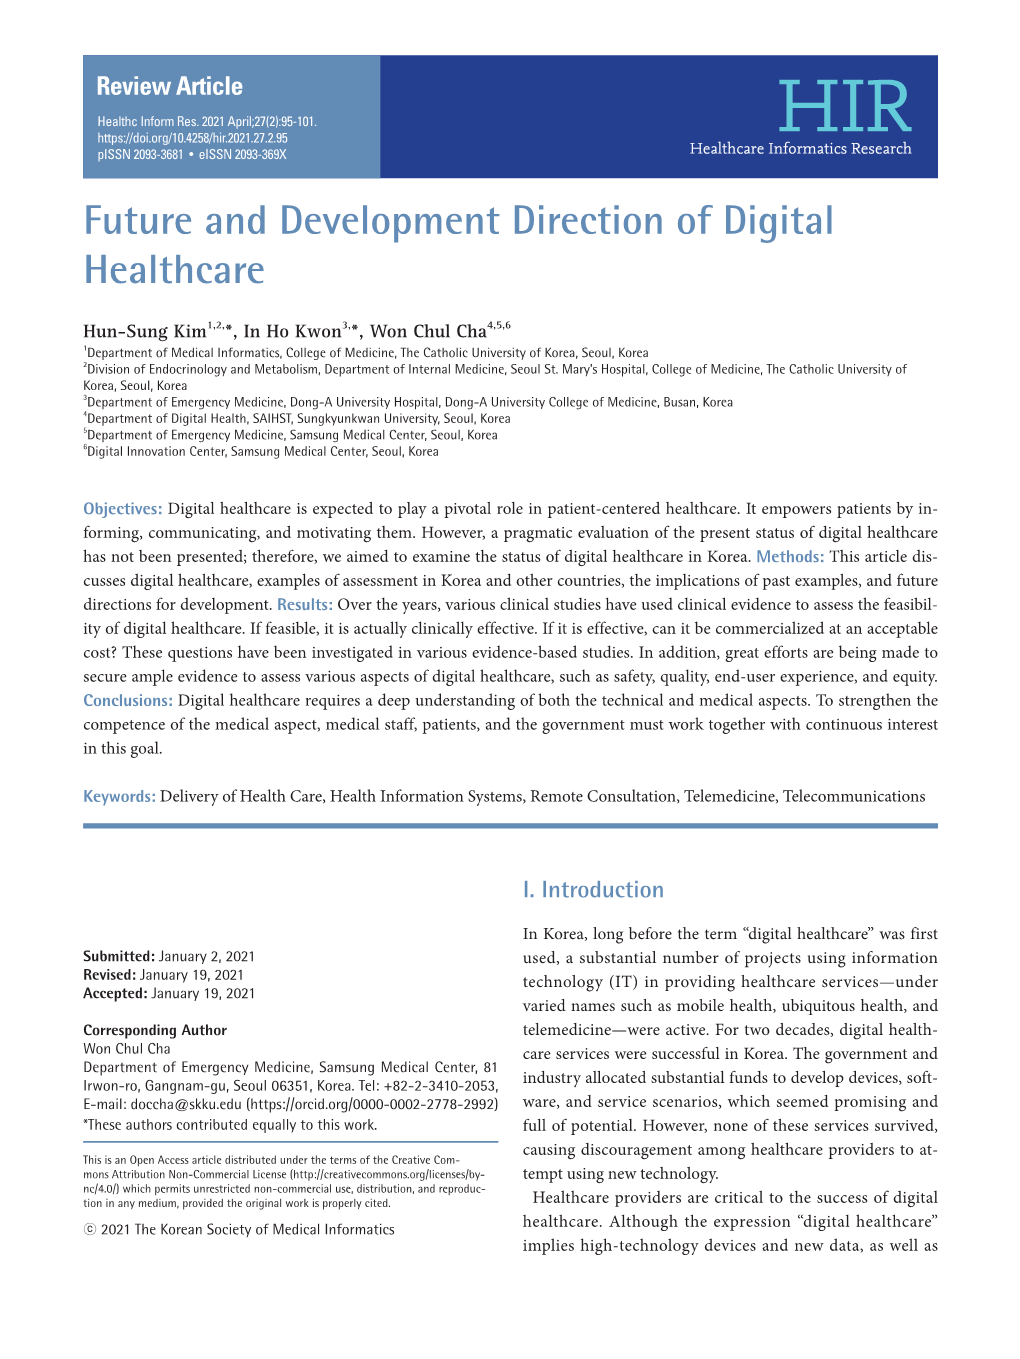 Future and Development Direction of Digital Healthcare